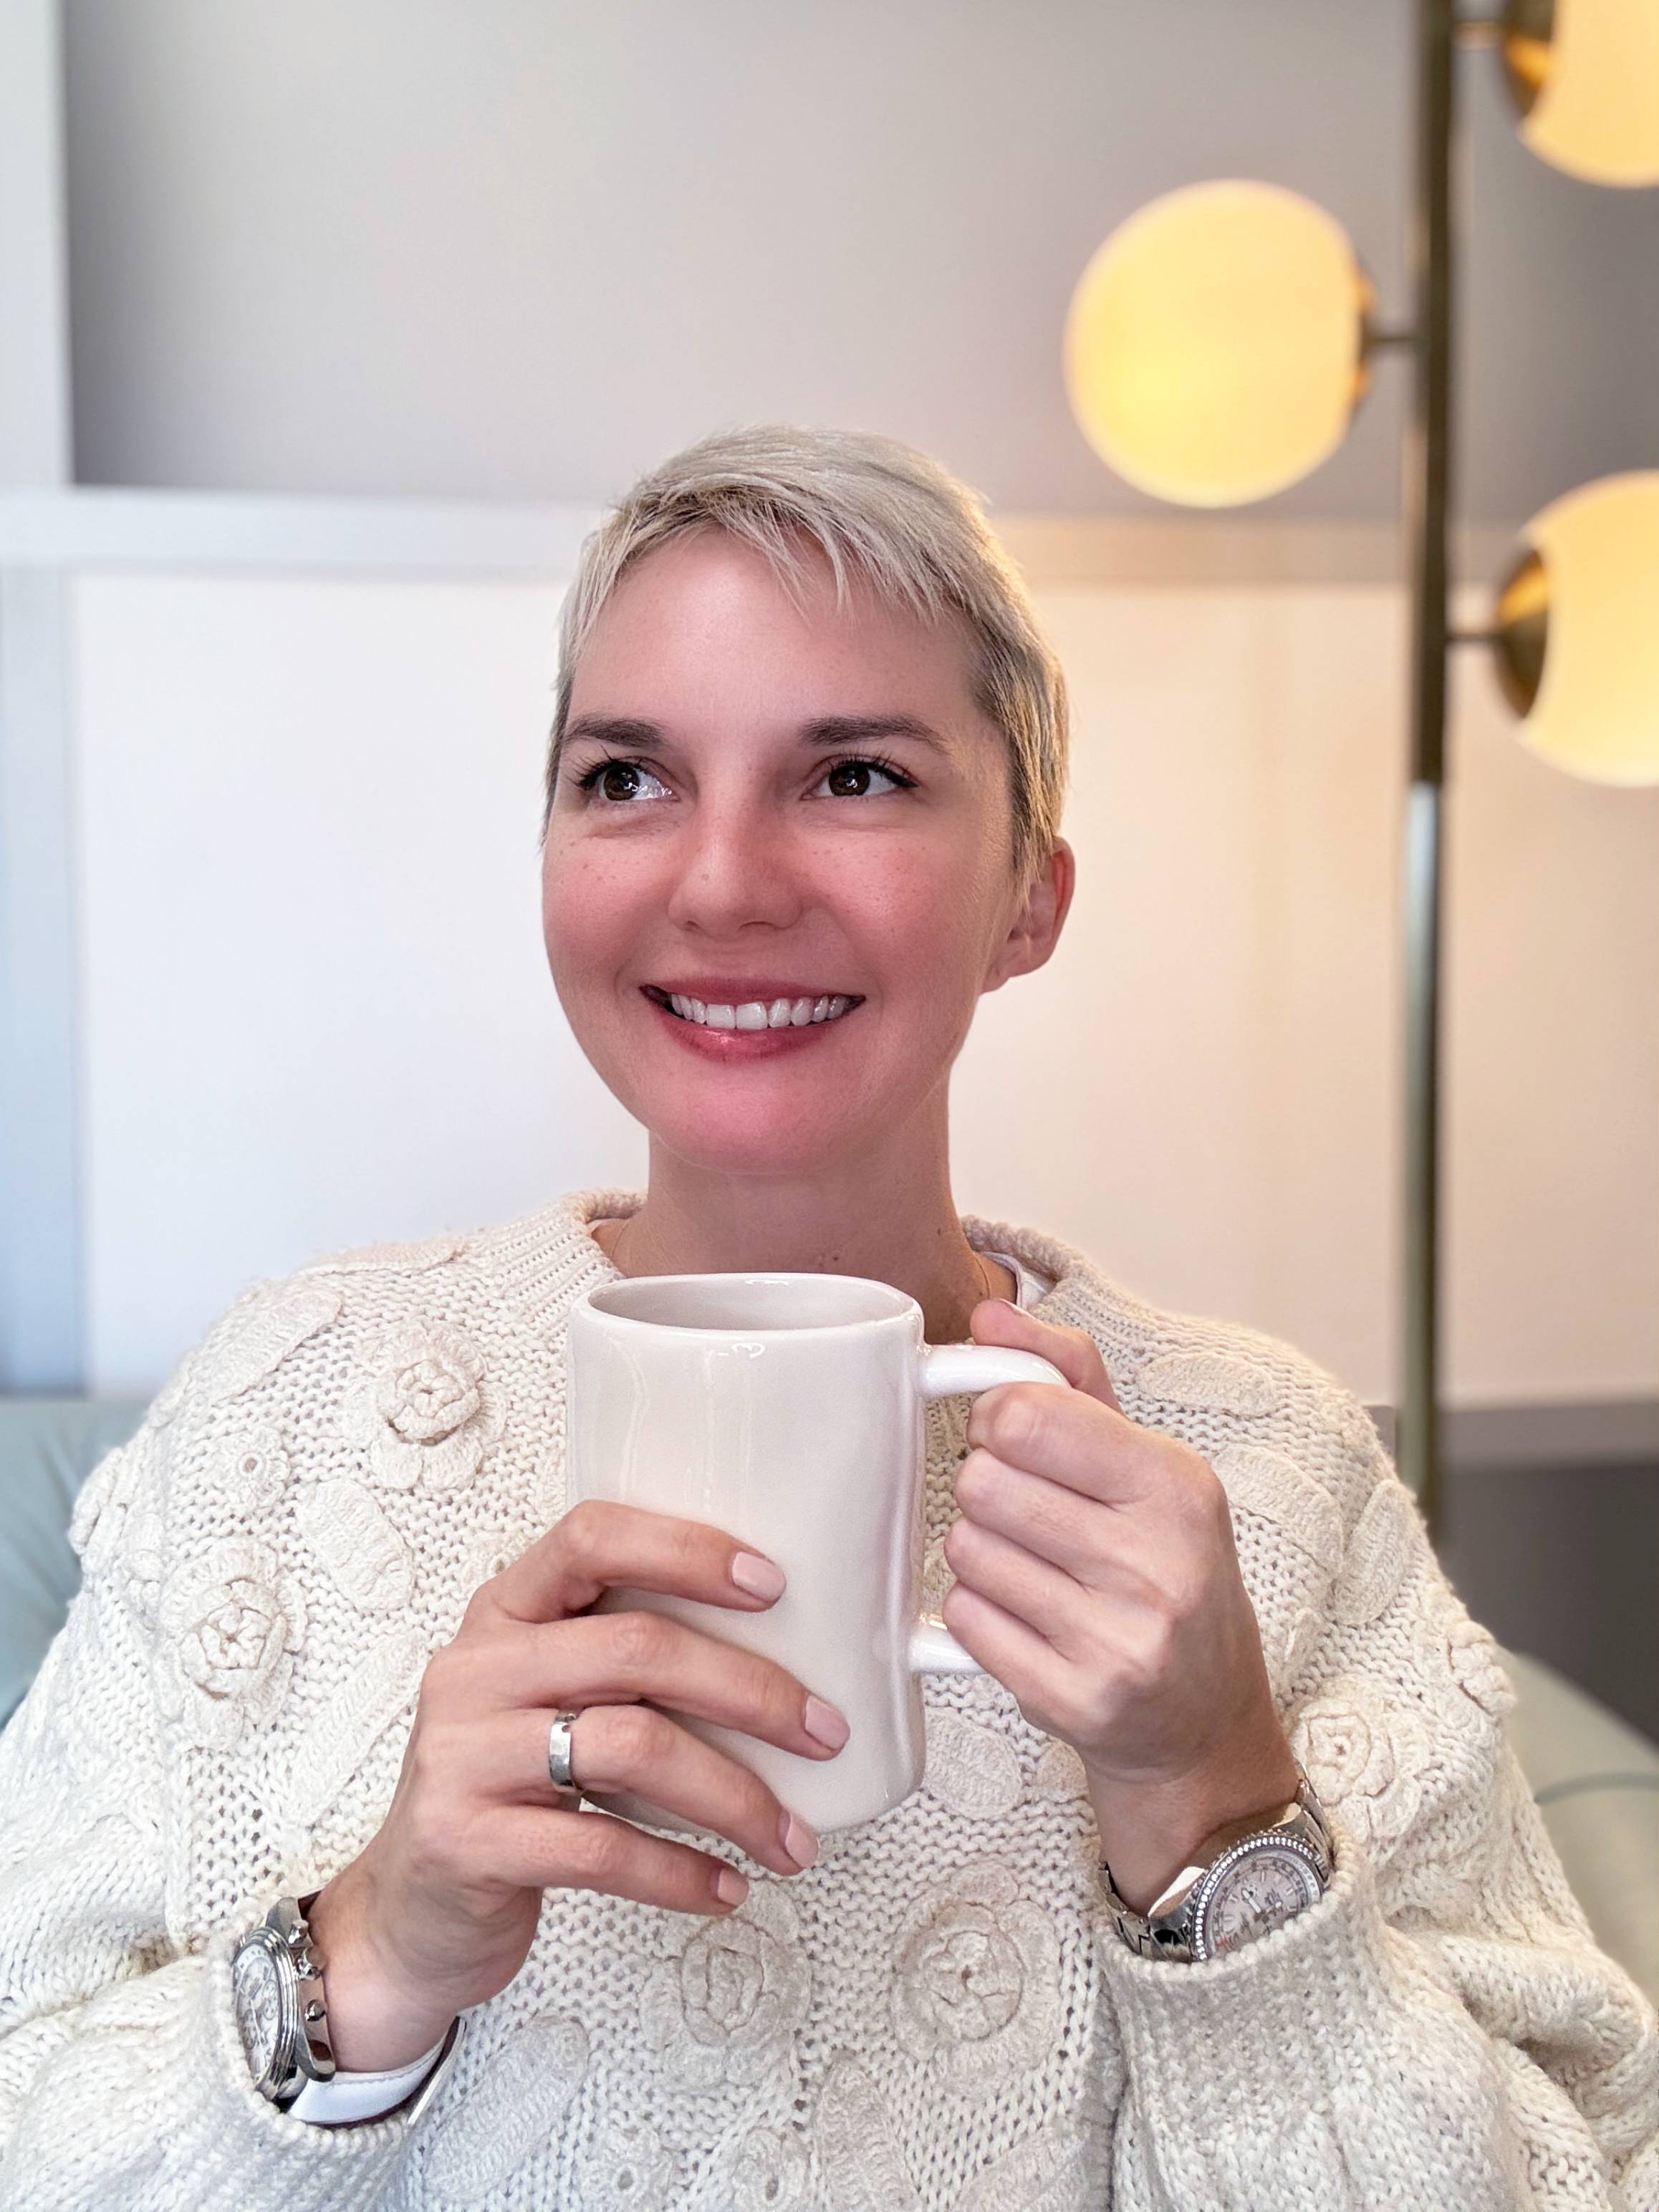 Abingdon Mullin, a middle aged woman with short blonde hair wearing a white sweater is holding a coffee mug with both hands. She has two watches on her wrists and is looking up and to the left. A lamp and wall are behind her